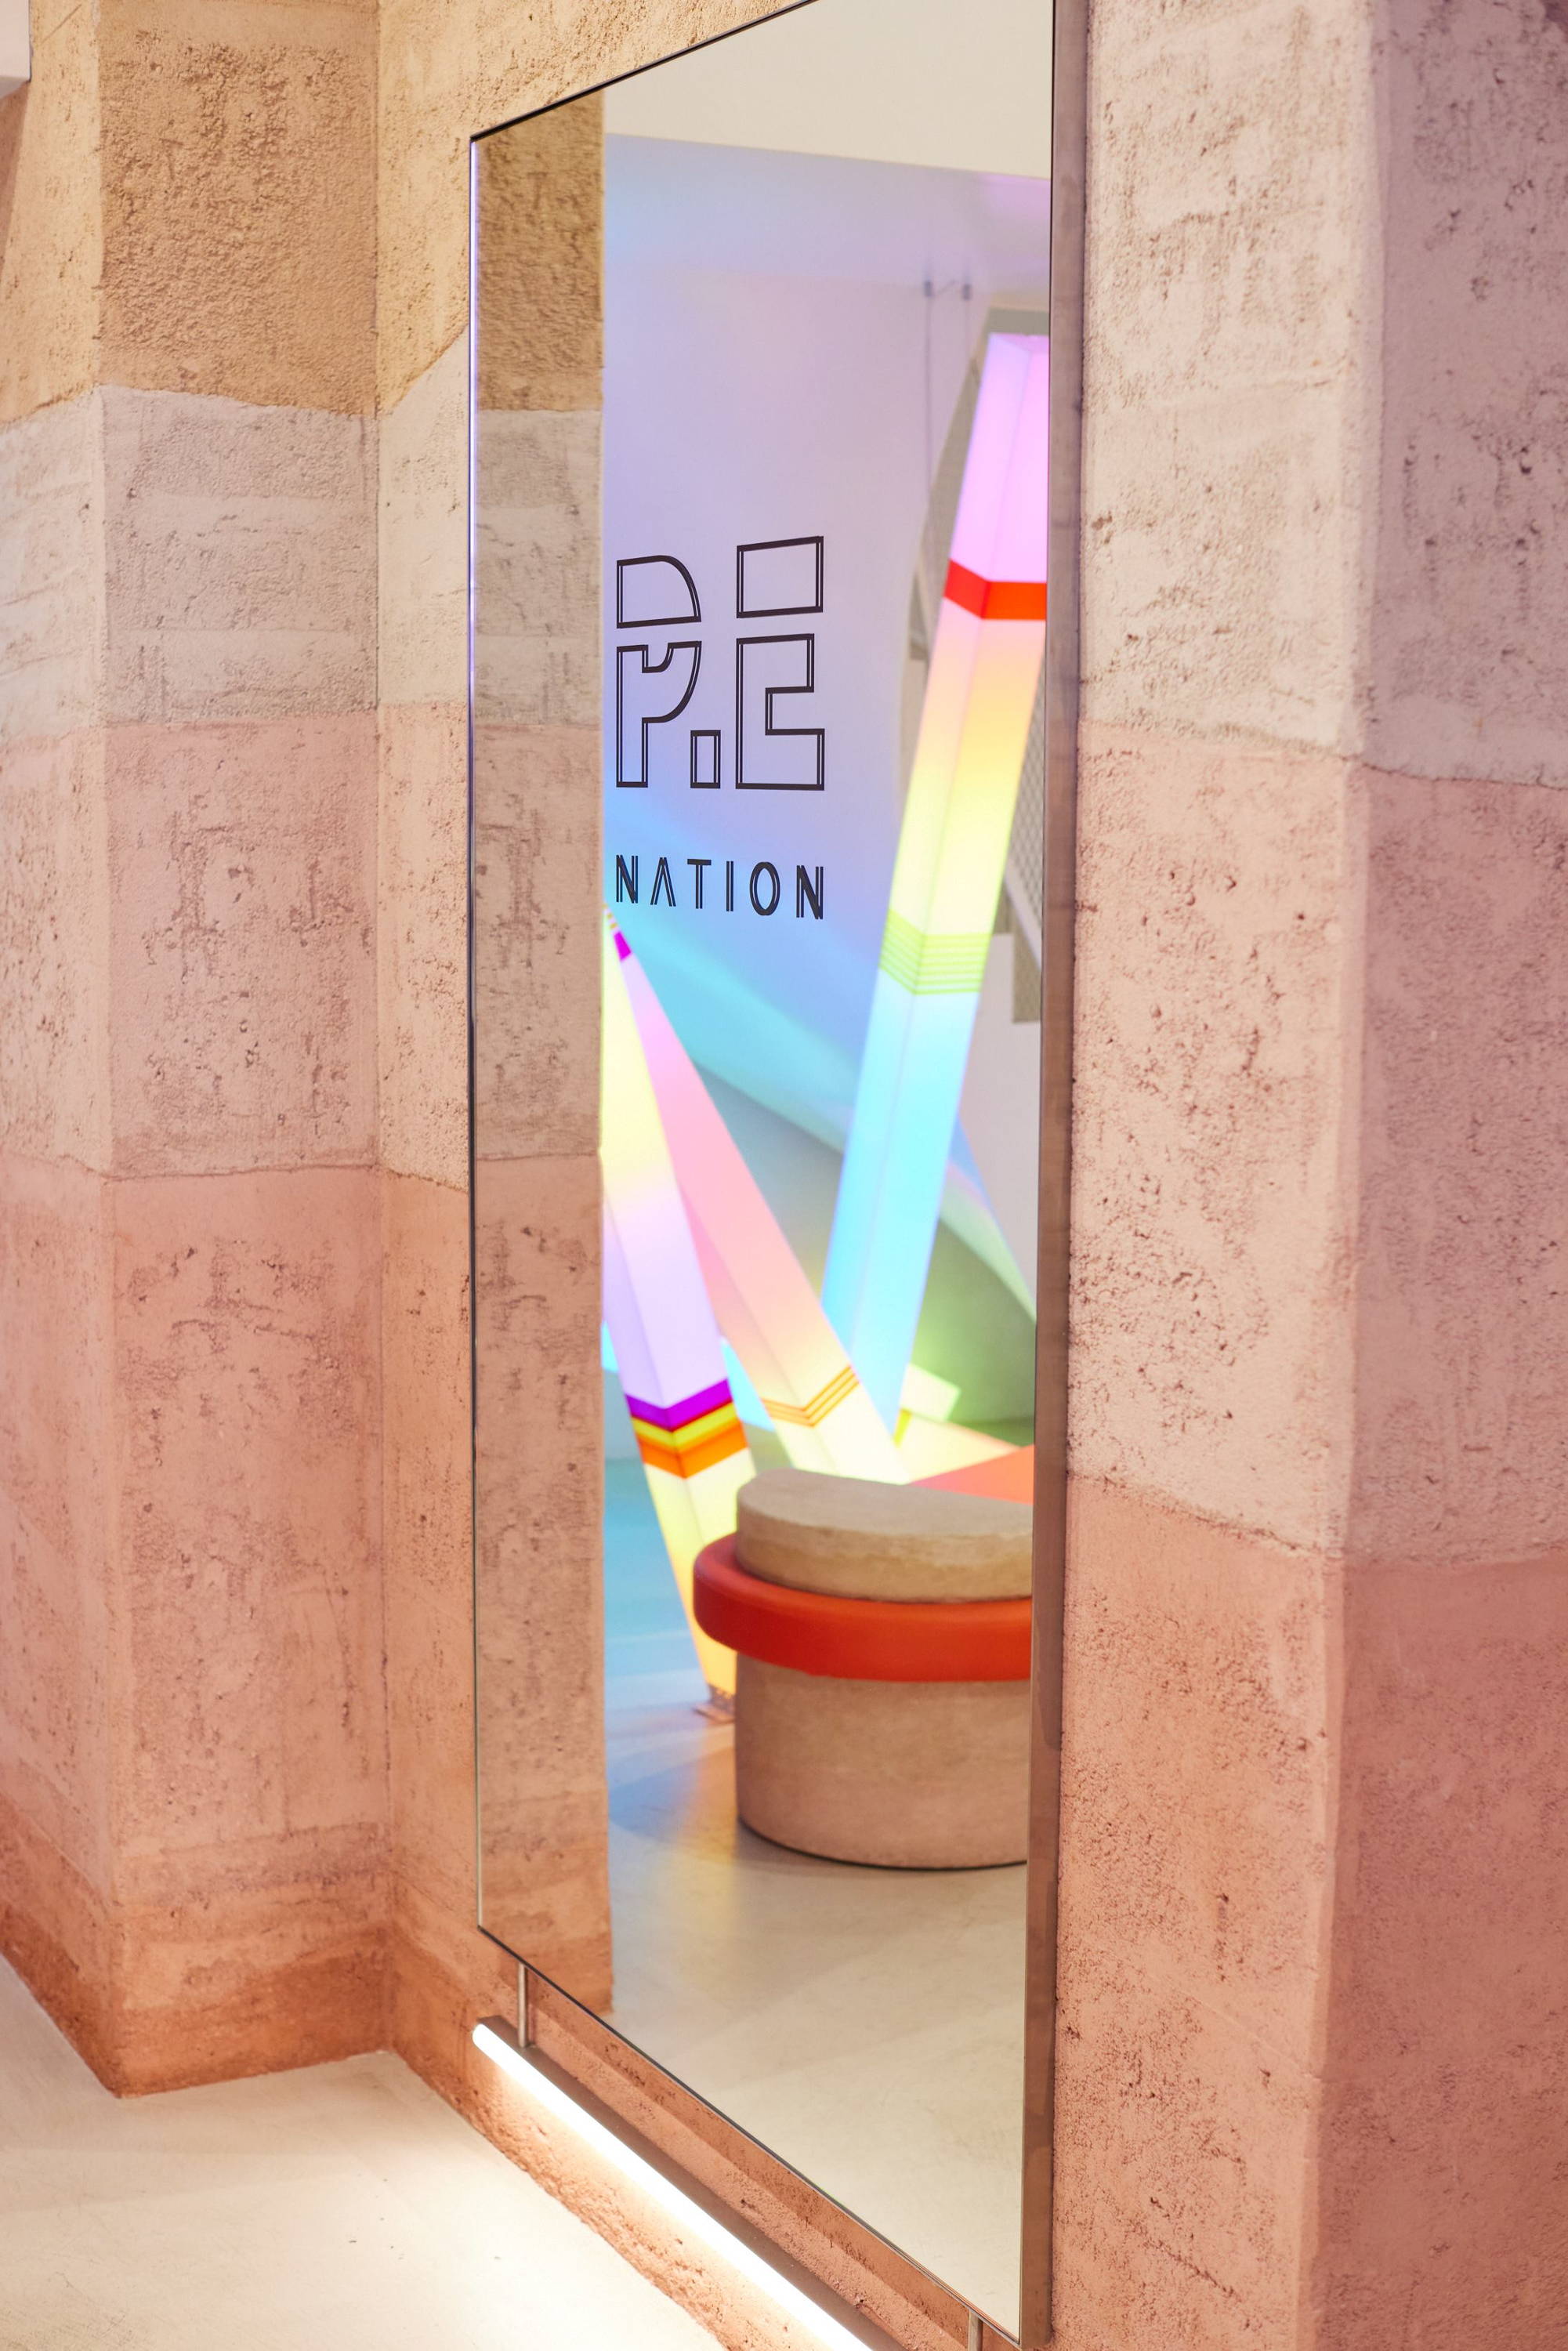 The P.E Nation Flagship Store in Sydney